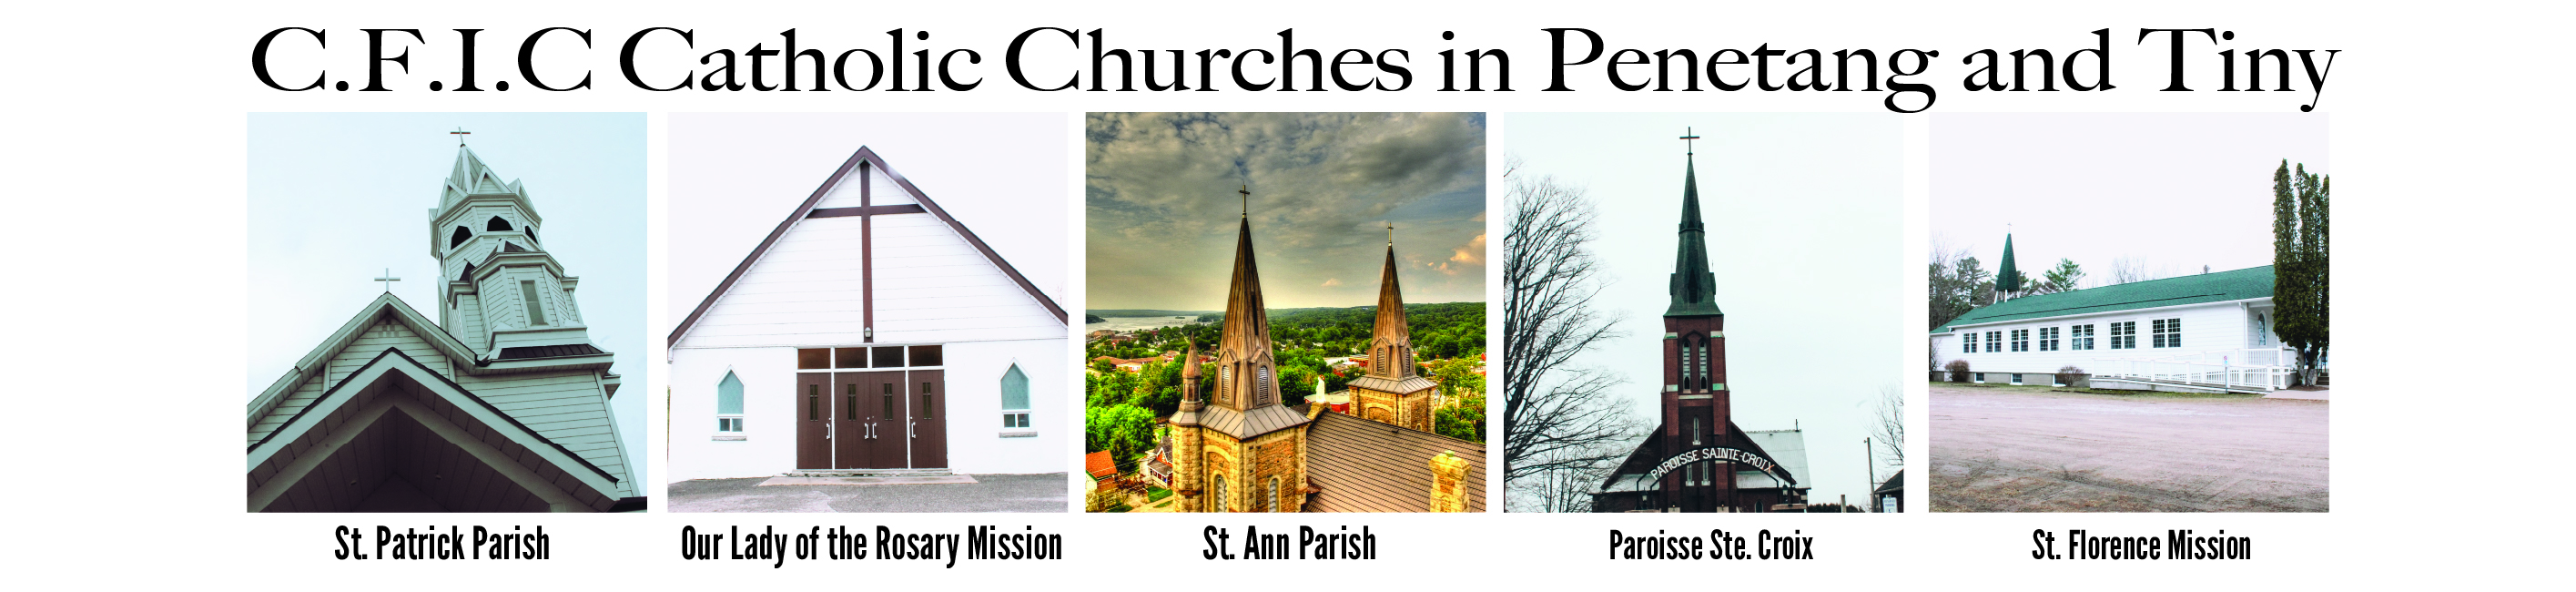 C.F.I.C Catholic Churches in Penetang and Tiny *images of each church with corresponding church name below* in order left to right - St. Patrick Parish - Our Lady of the Rosary Mission - St. Ann Parish - Paroisse Ste. Croix - St. Florence